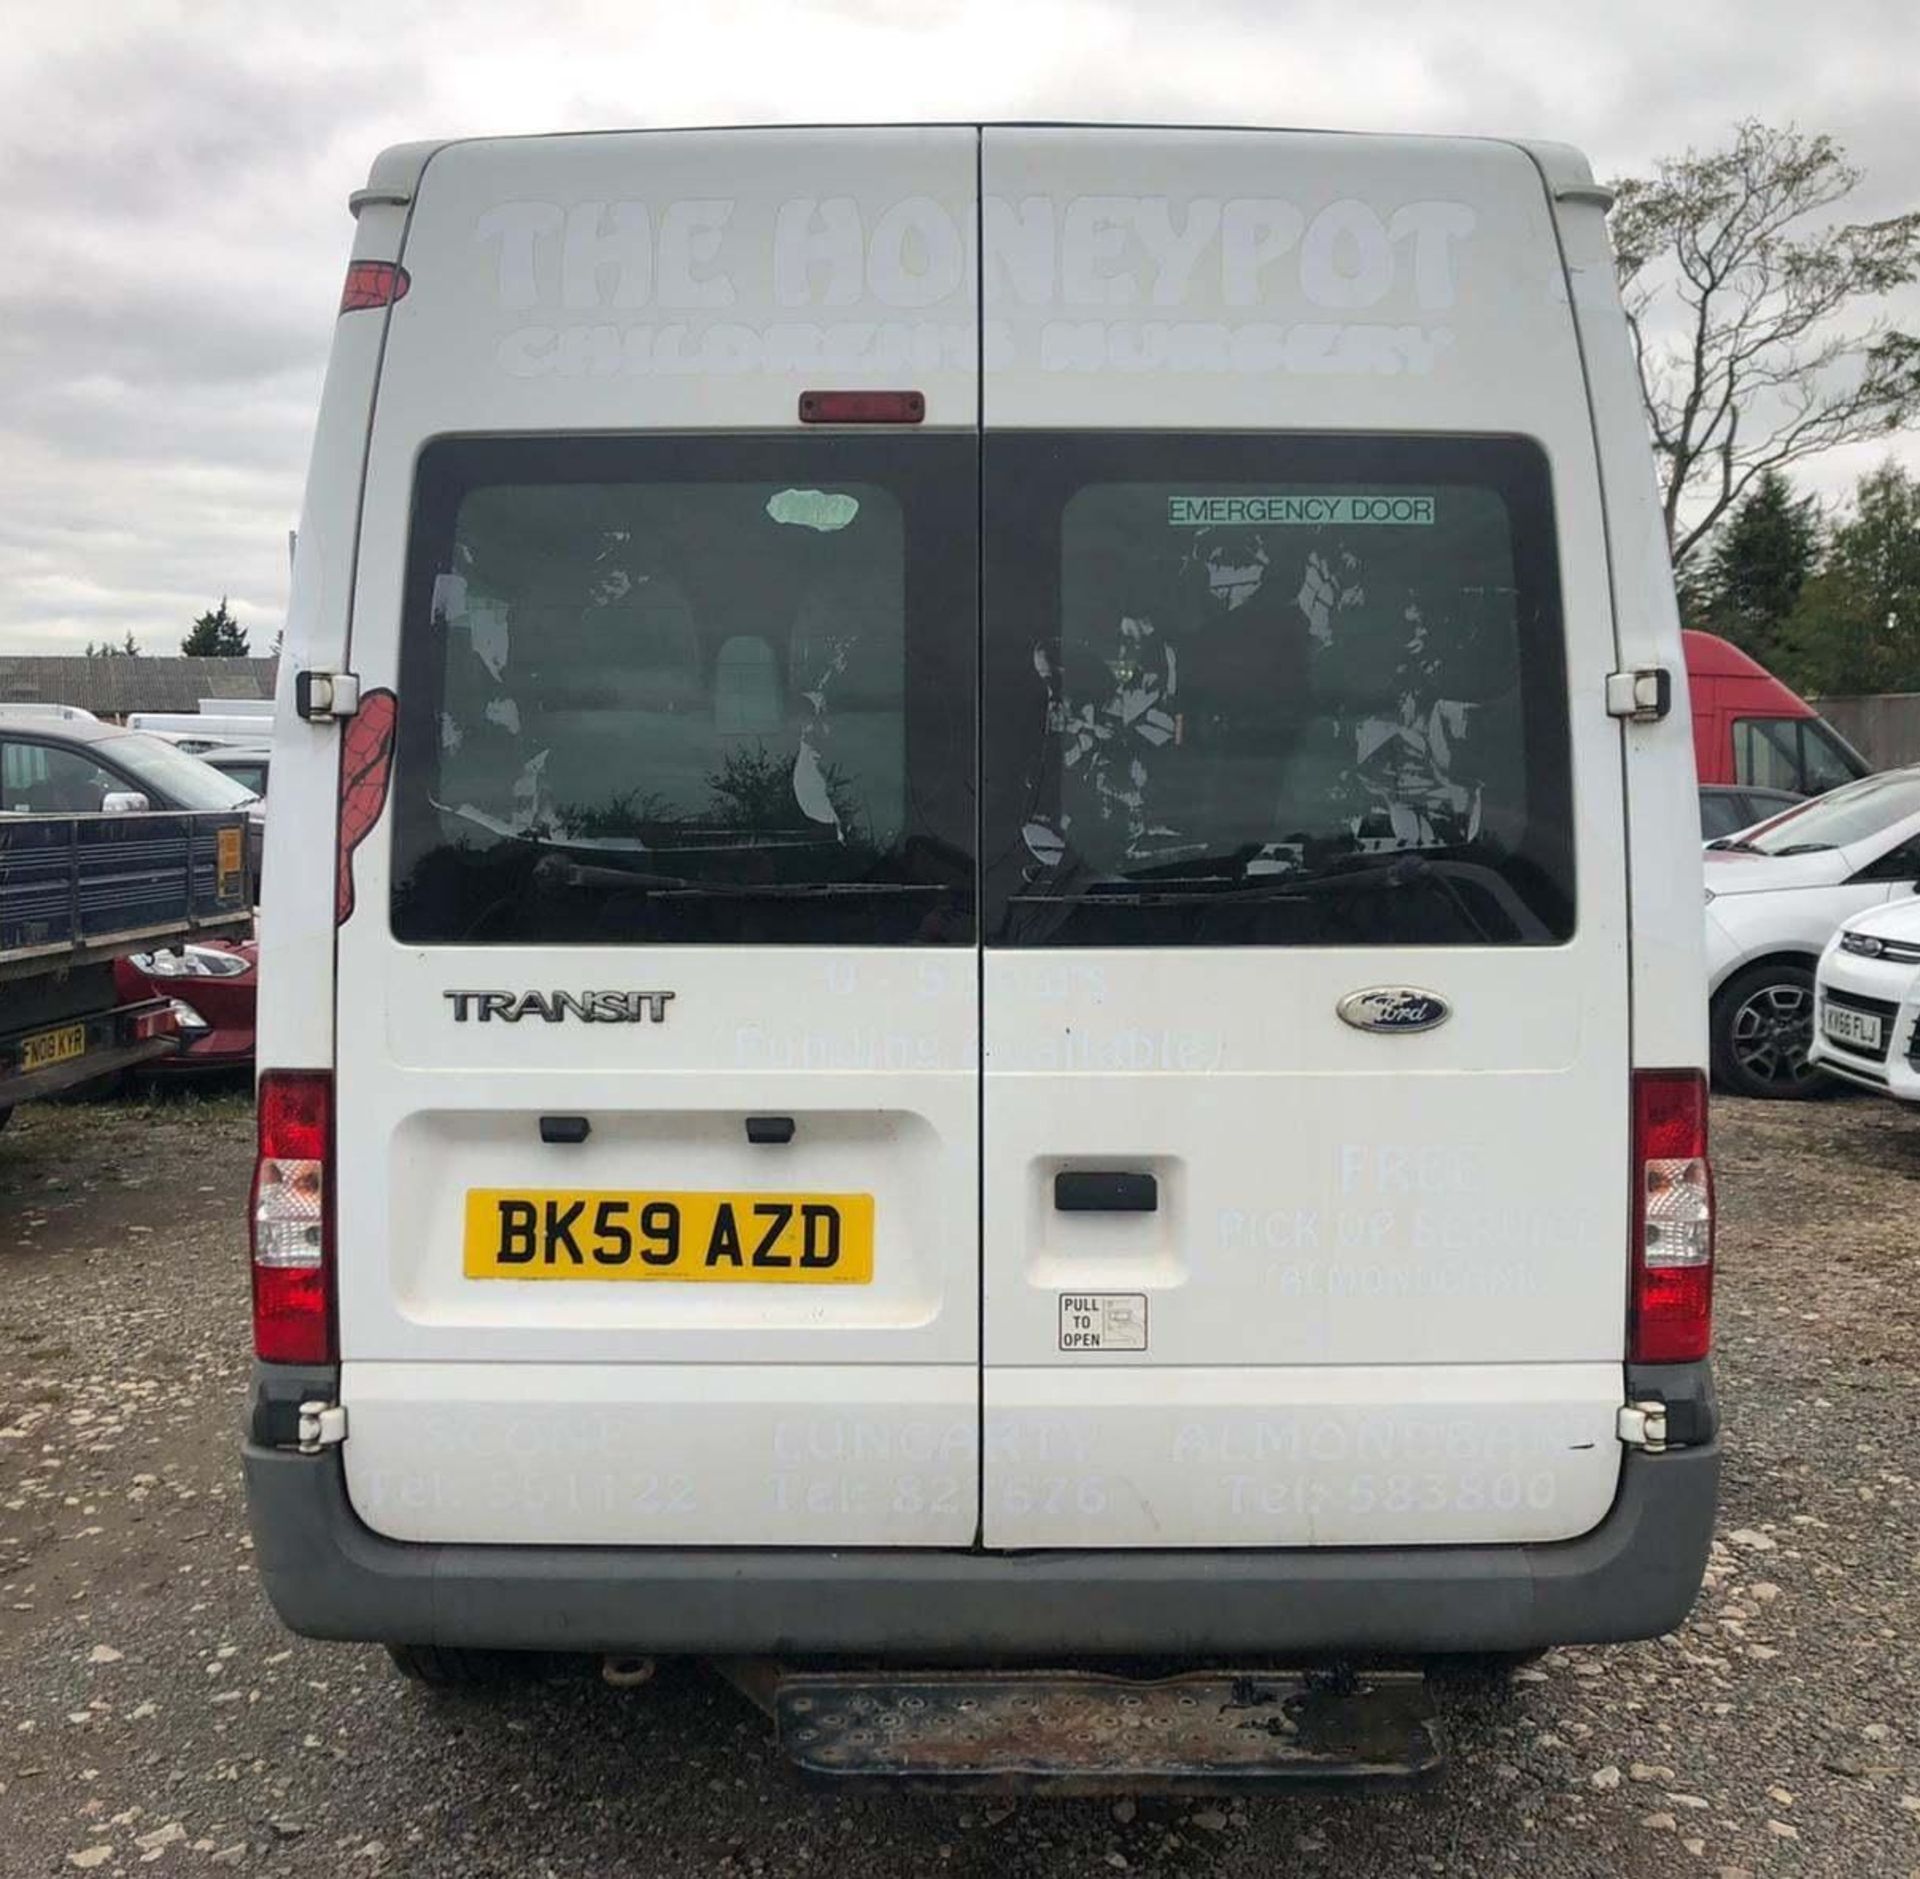 2009 Ford Transit 2.4D 15 Seat Minibus - CL505 - NO VAT ON THE HAMMER - Location: Corby, Northampton - Image 6 of 11